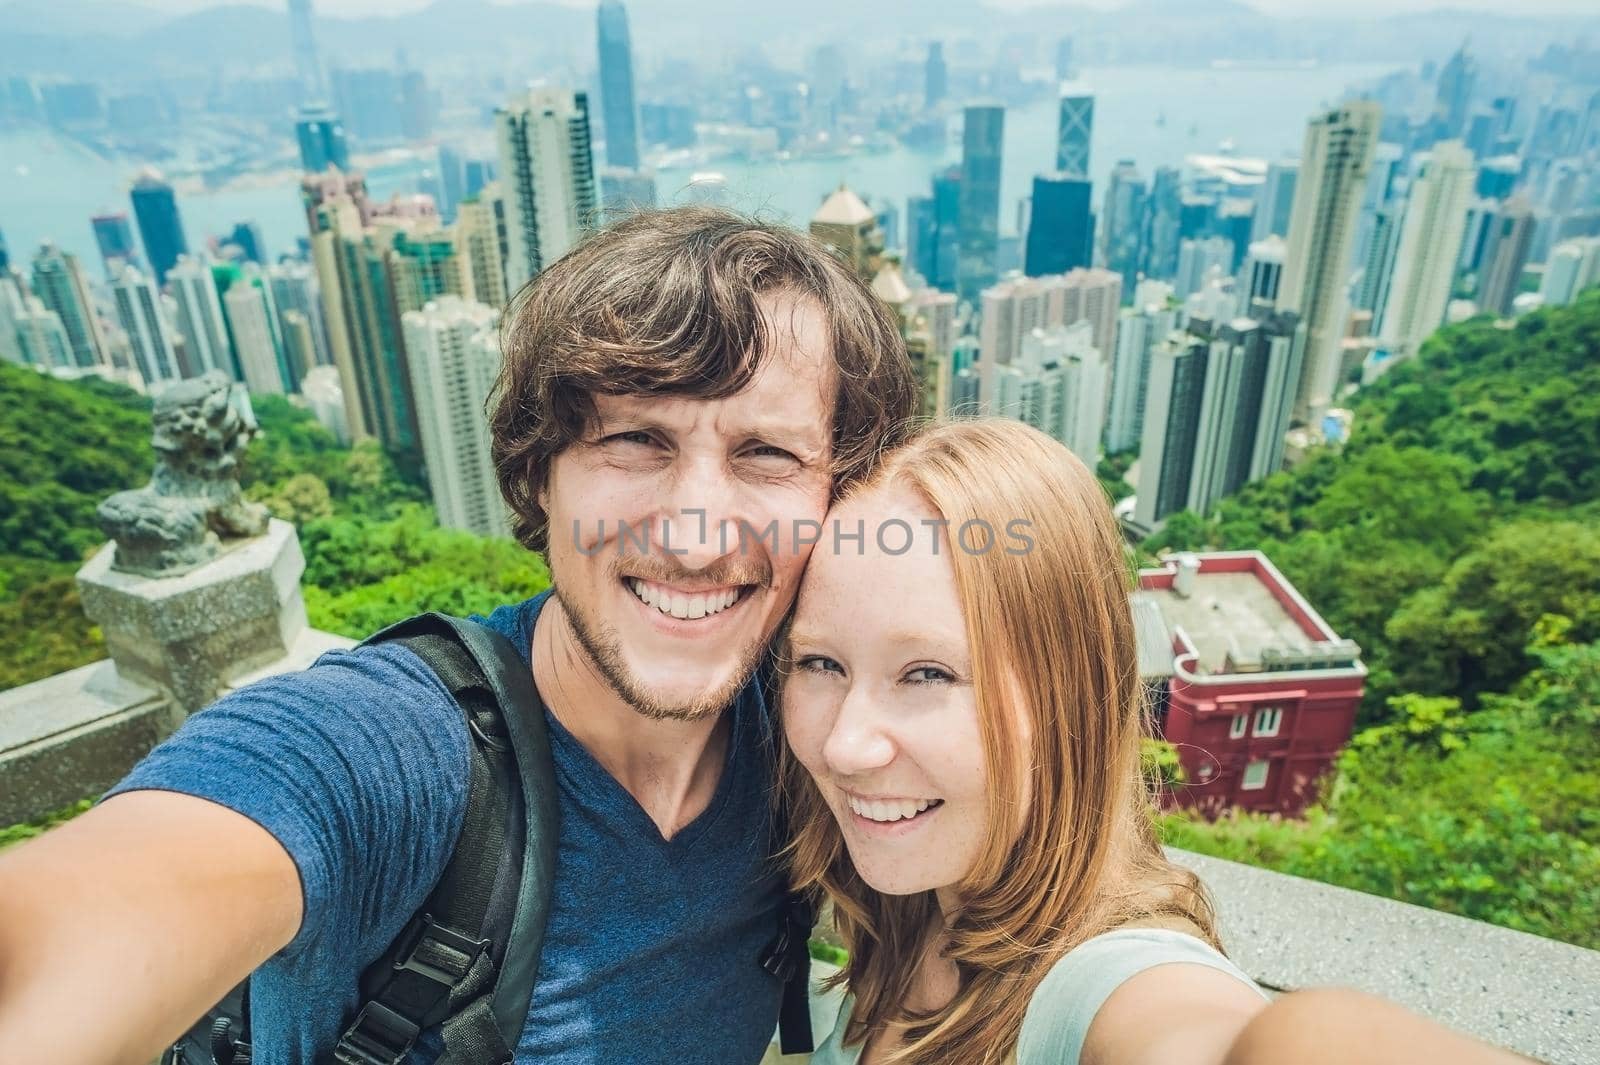 Caucasian couple in Hong Kong. Young people taking selfie picture at viewpoint of famous attraction Victoria Peak, HK, China.